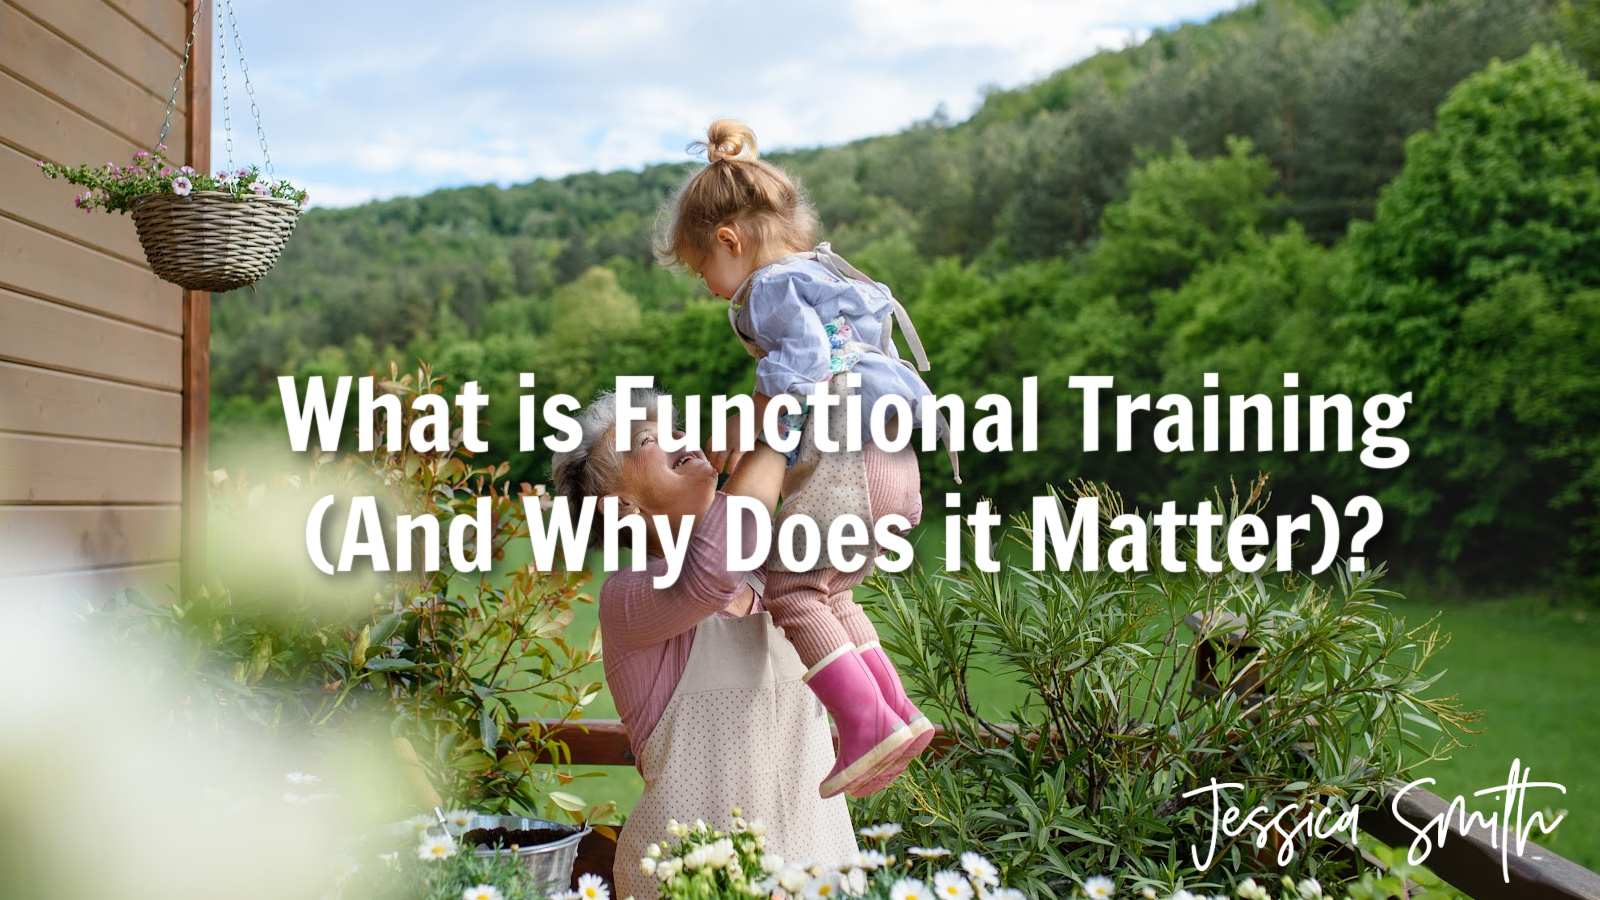 What is Functional Training (And Why Does It Matter)?